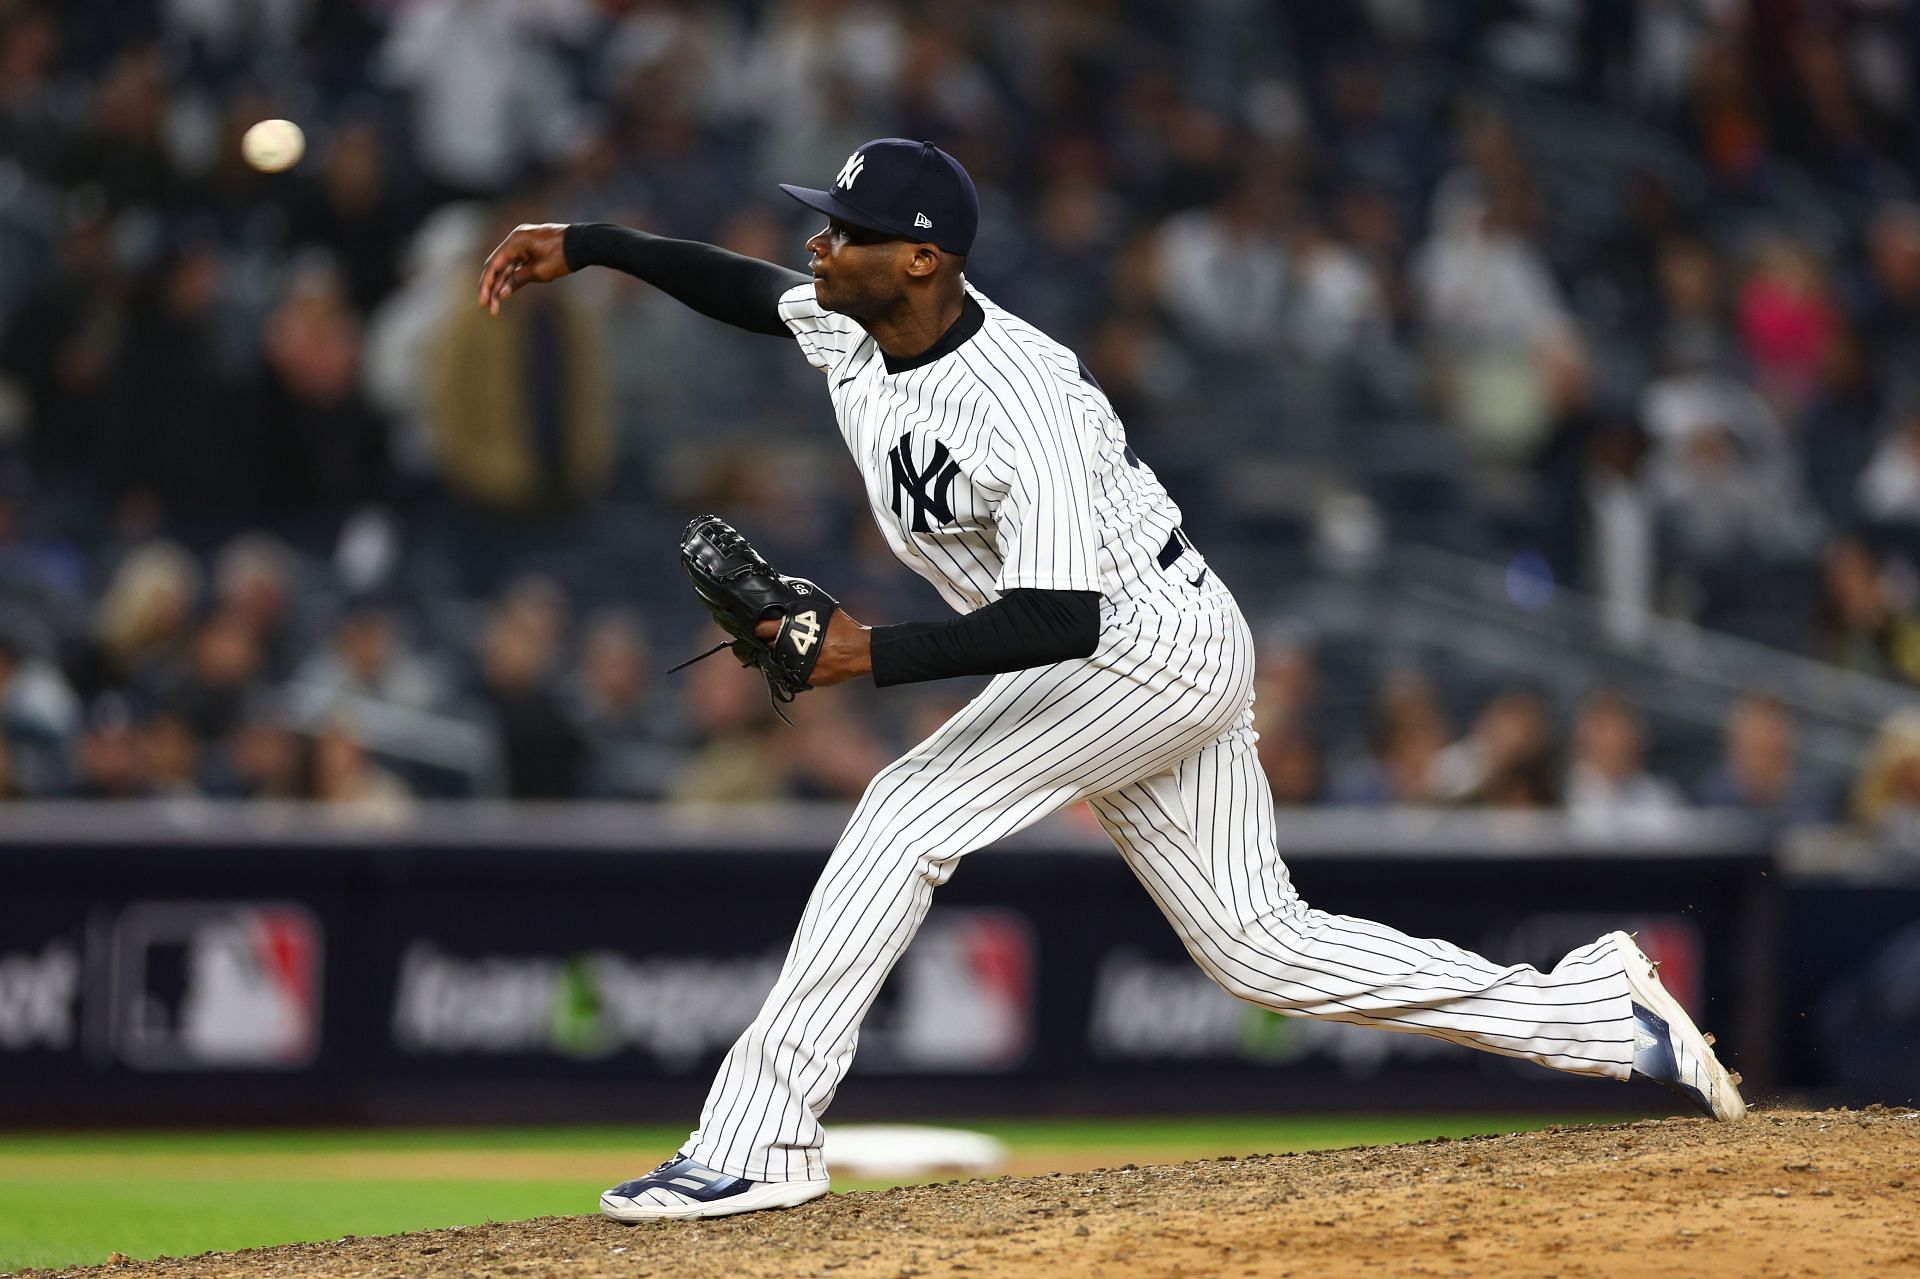 Domingo German pitches against the Houston Astros in game three of the ALCS at Yankee Stadium